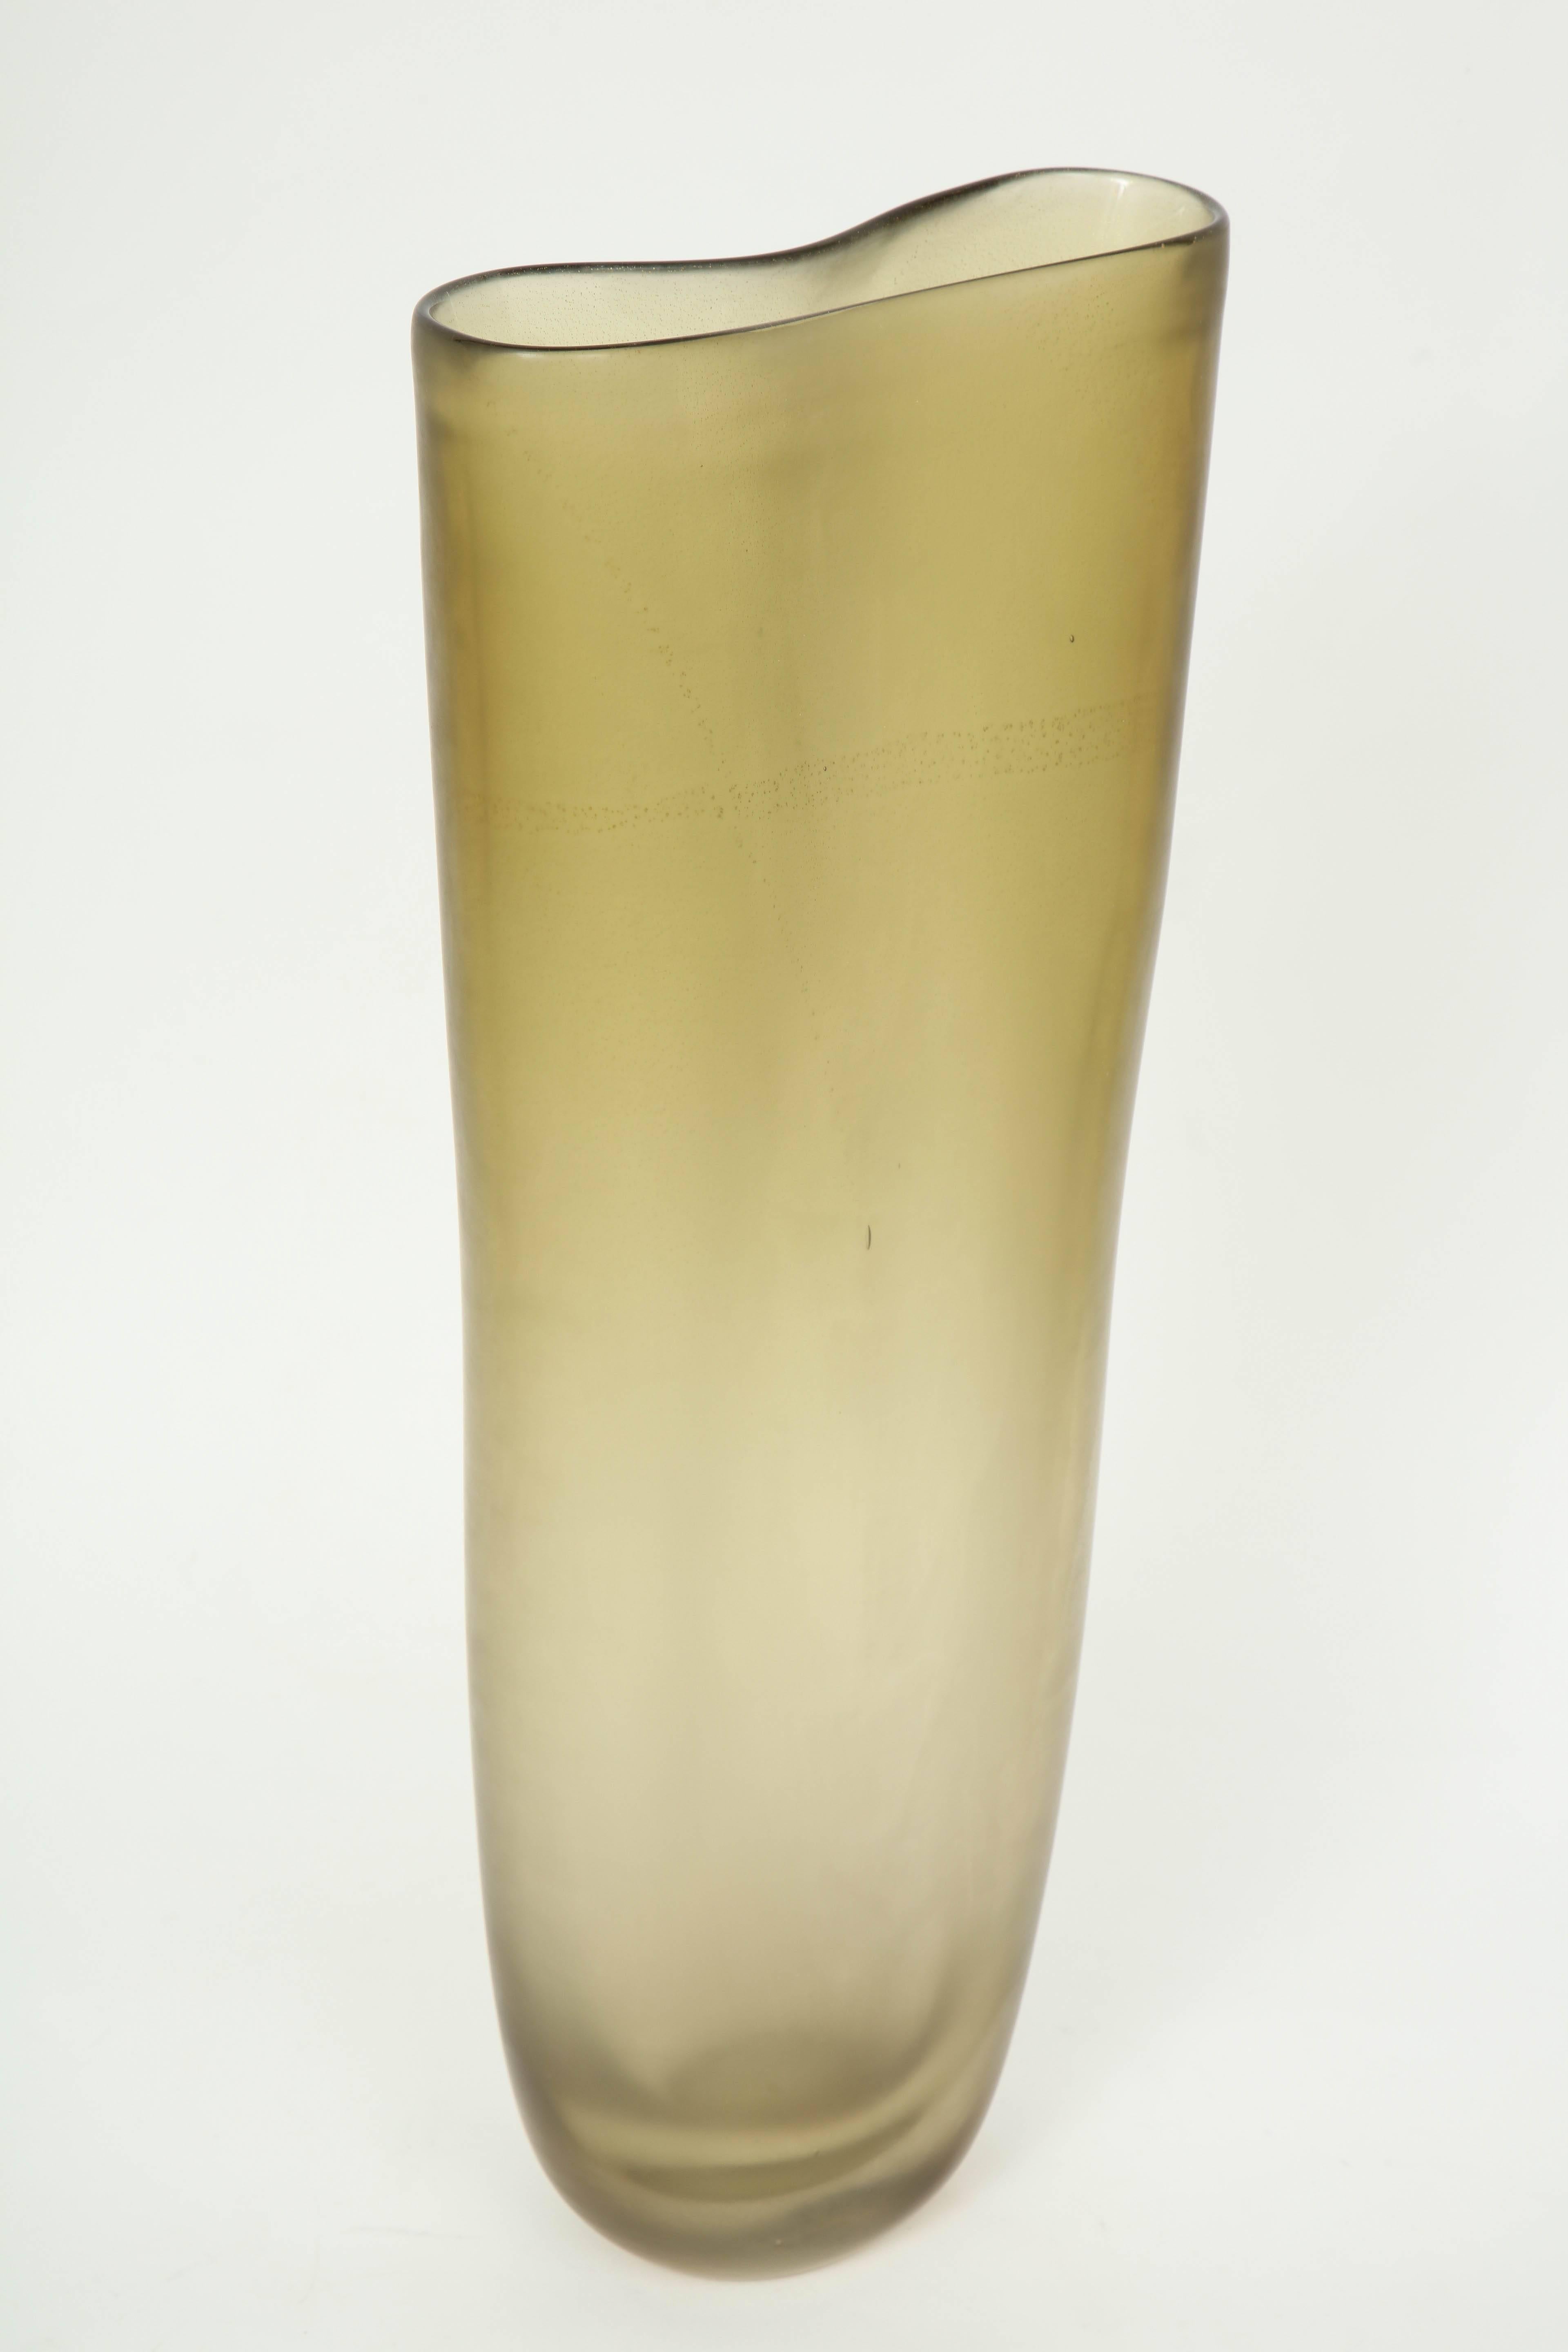 Large-scale Murano glass vase with a slight ombre color effect with a seductive satin finish. Vase has a pinched/circle eight opening and a thick glass bottom. Signed on bottom.